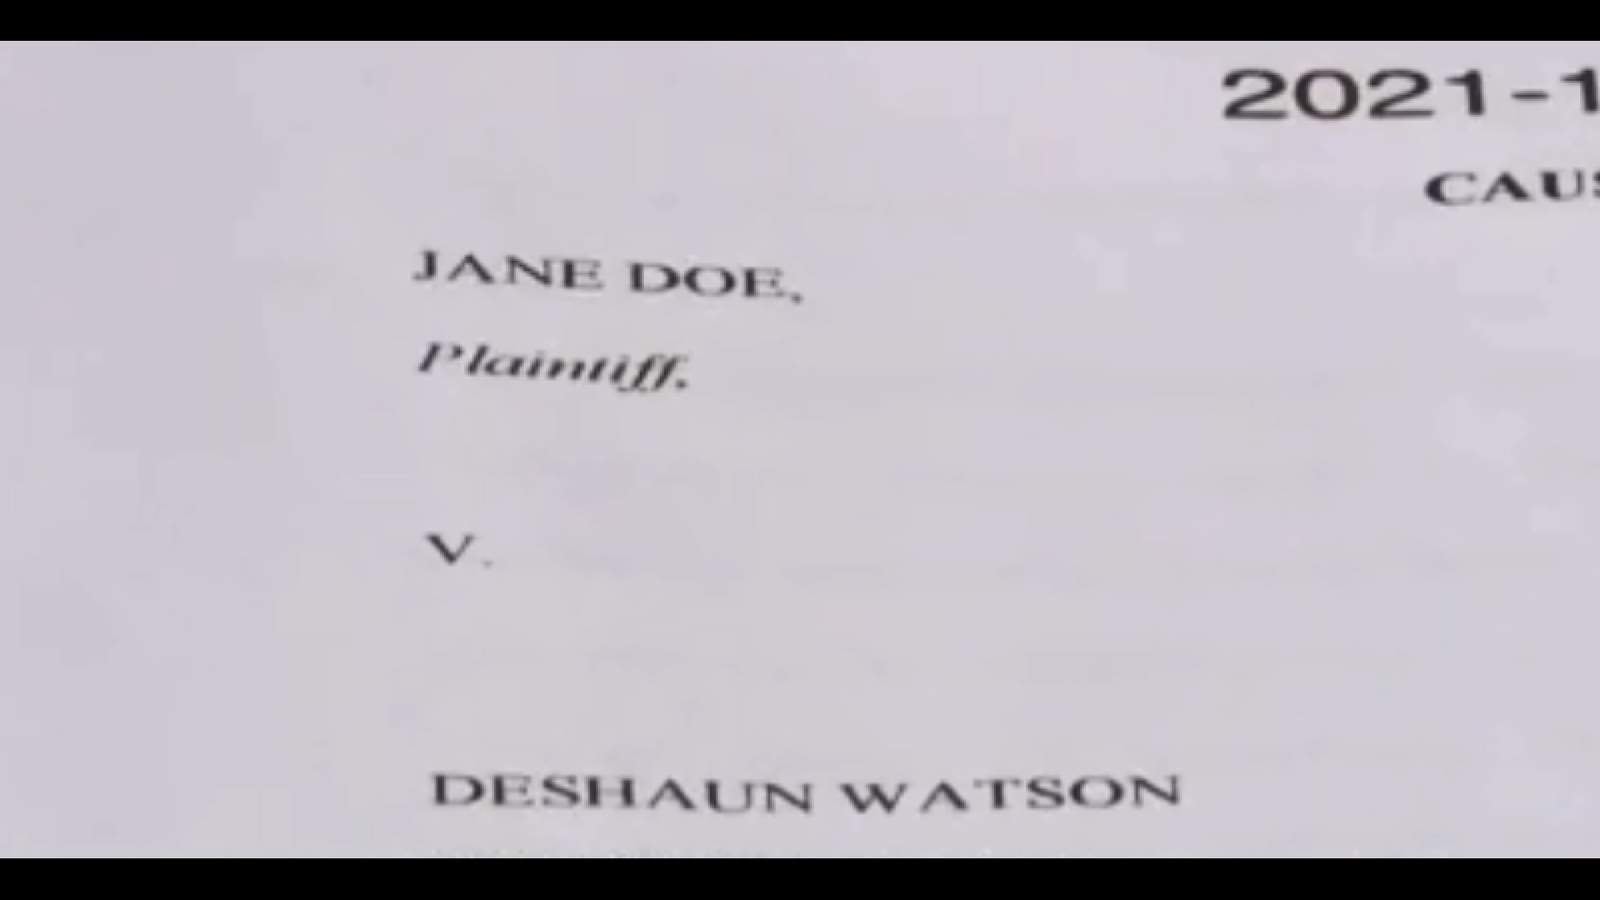 The name ‘Jane Doe’ appears to be a hardship for Deshaun Watson’s defense team